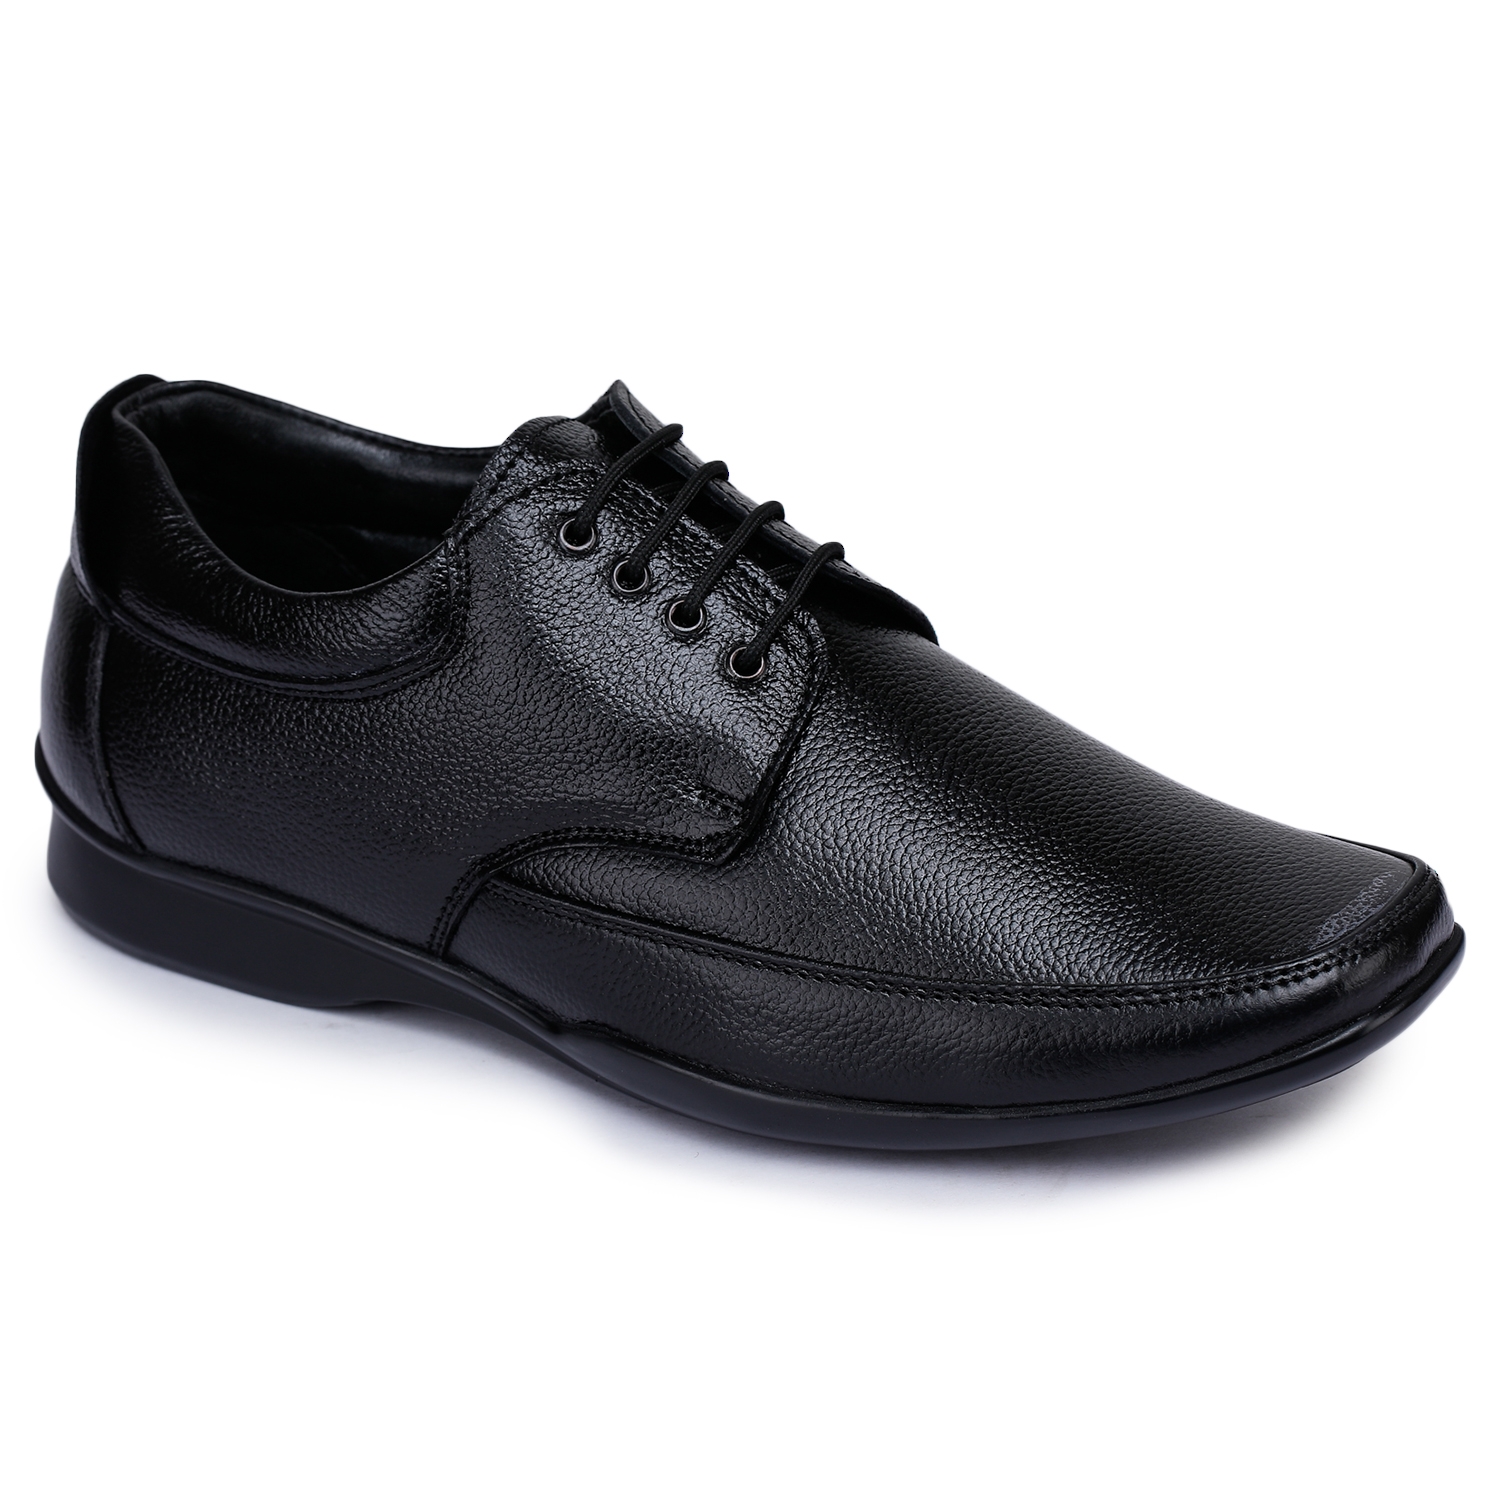 Liberty | Liberty Fortune Black Formal Derby Shoes HOL-20_Black For - Men